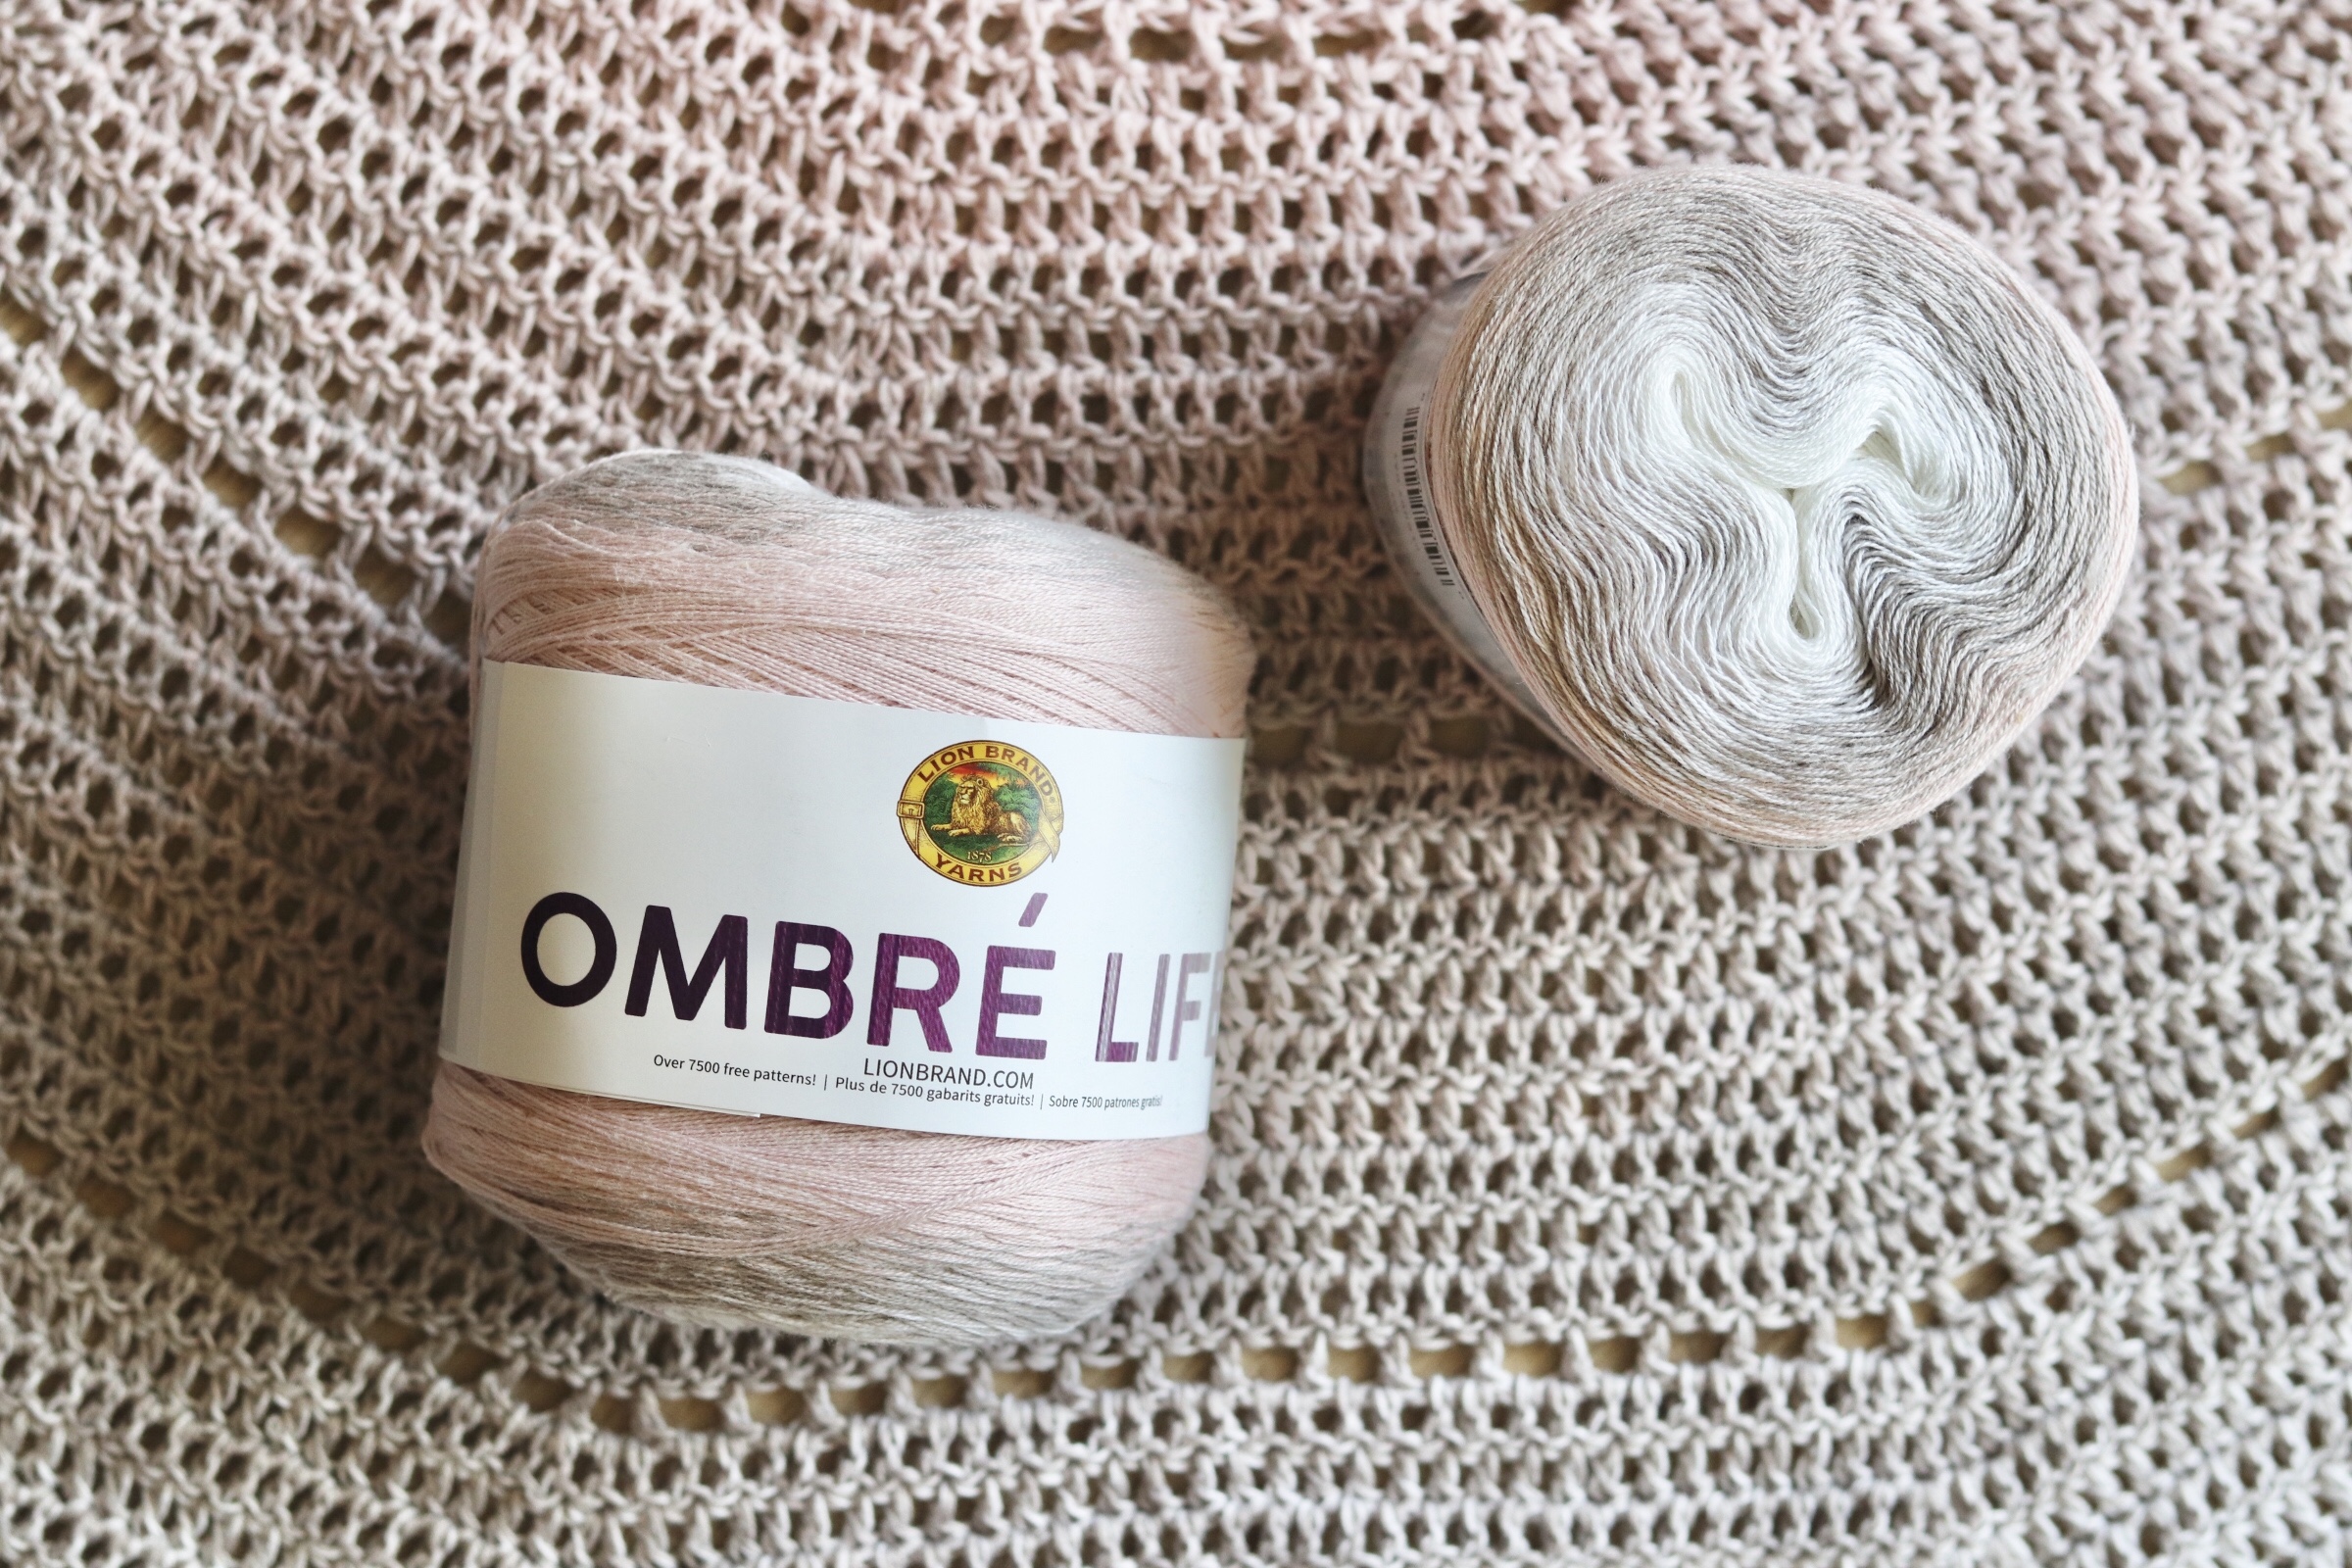 New Yarns From Lionbrand, Yarn Unboxing